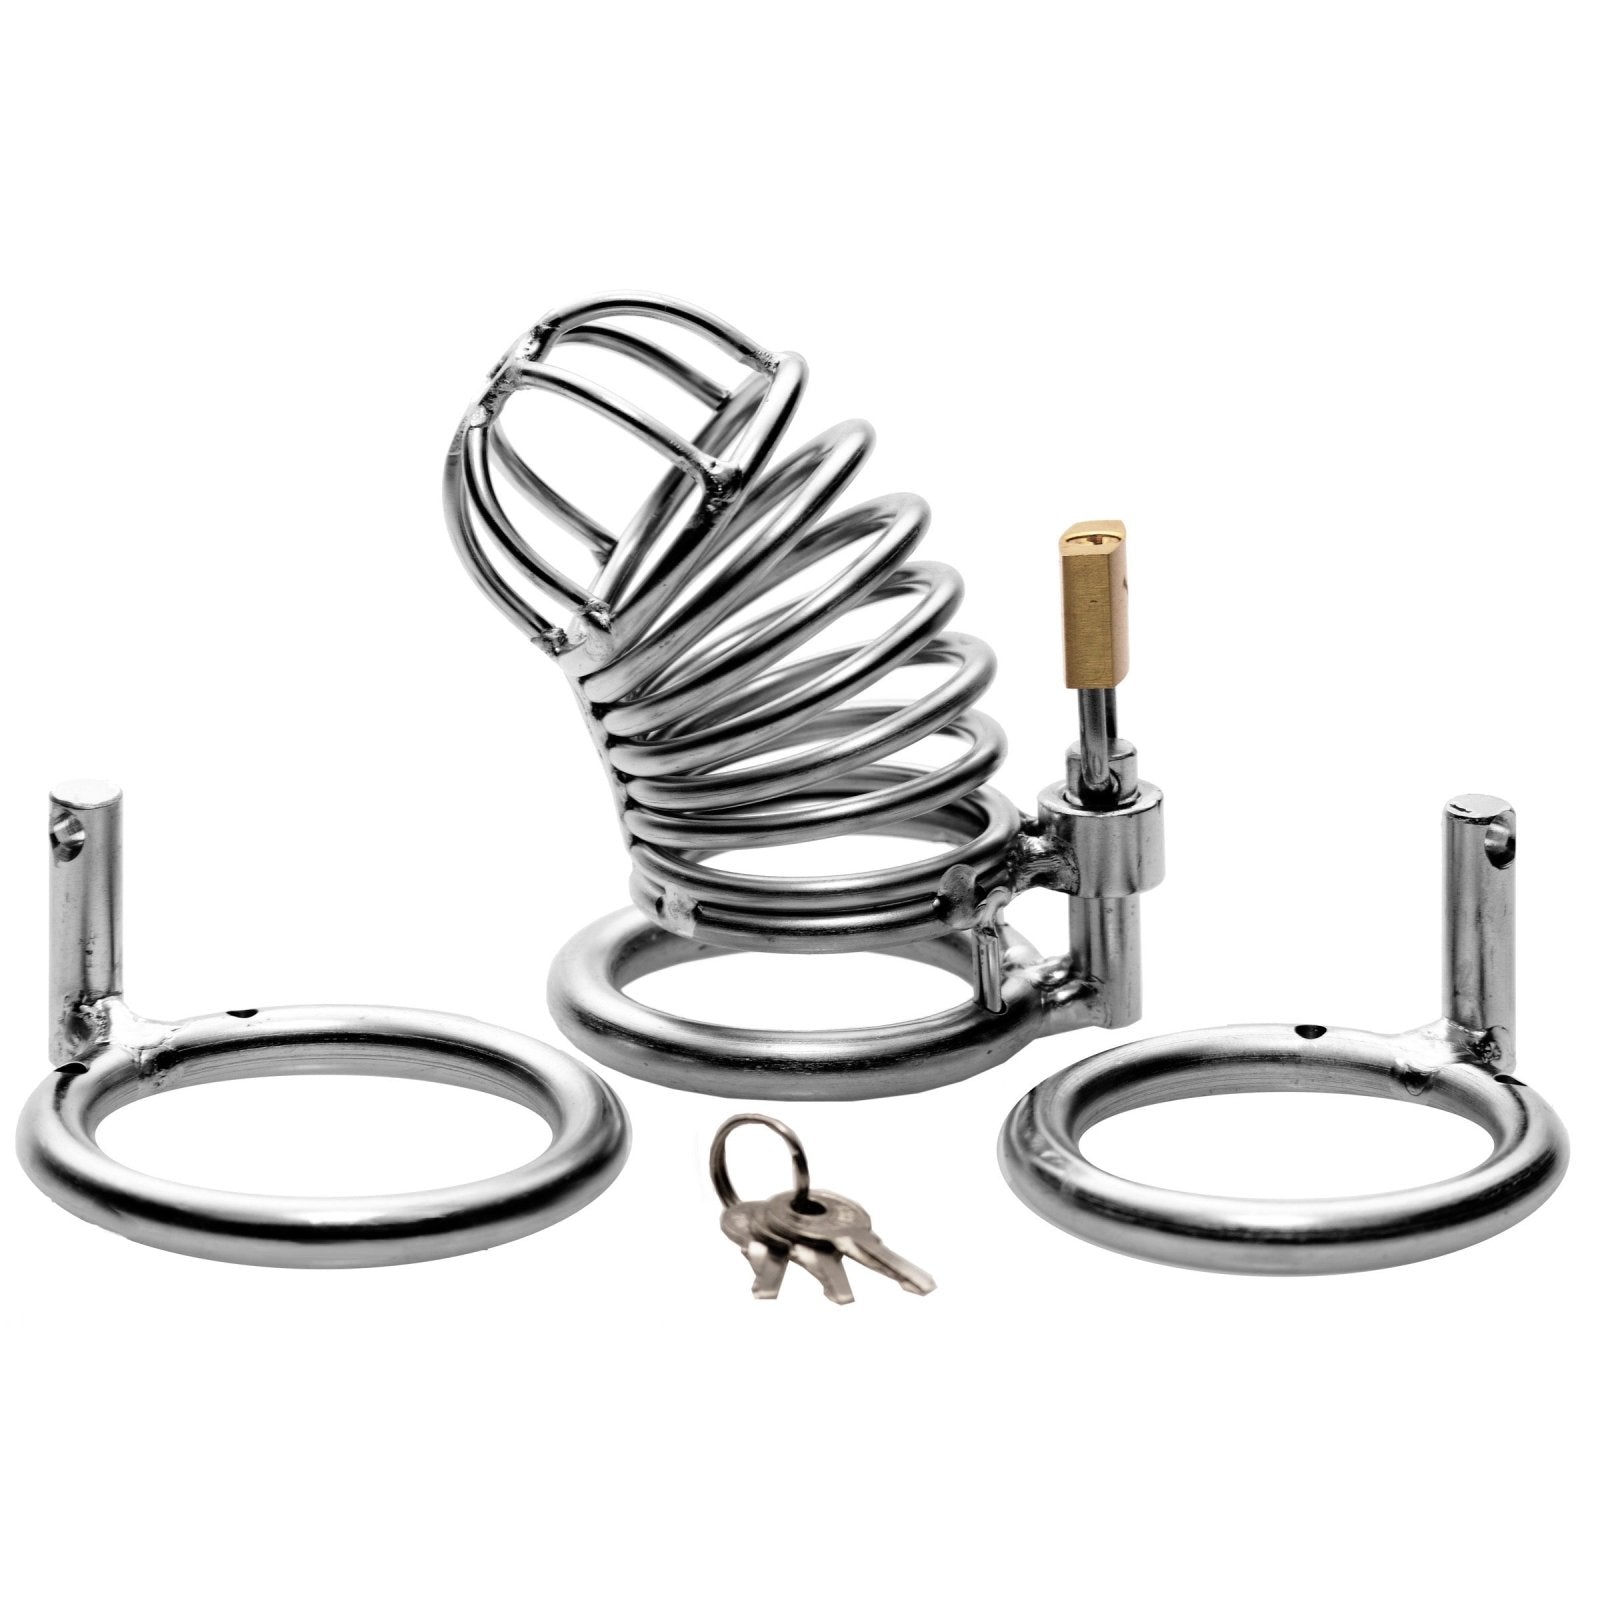 The Jail House Chastity Cage Device - Kink Store